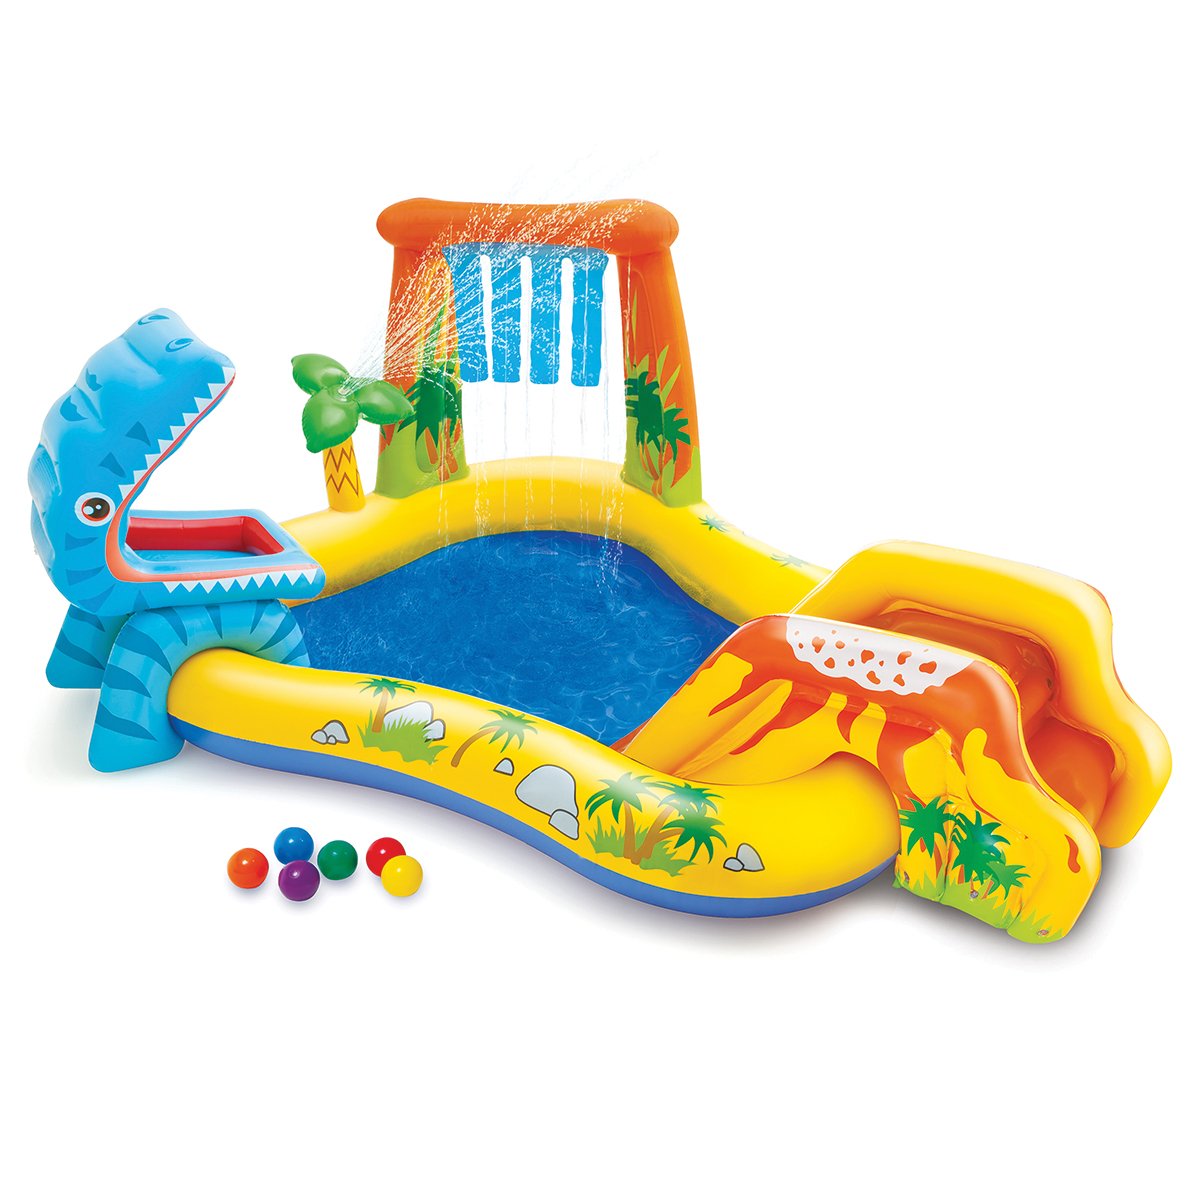 Intex 57444 Dinosaur Play Centre Kids Inflatable Pool with Water Slide 1